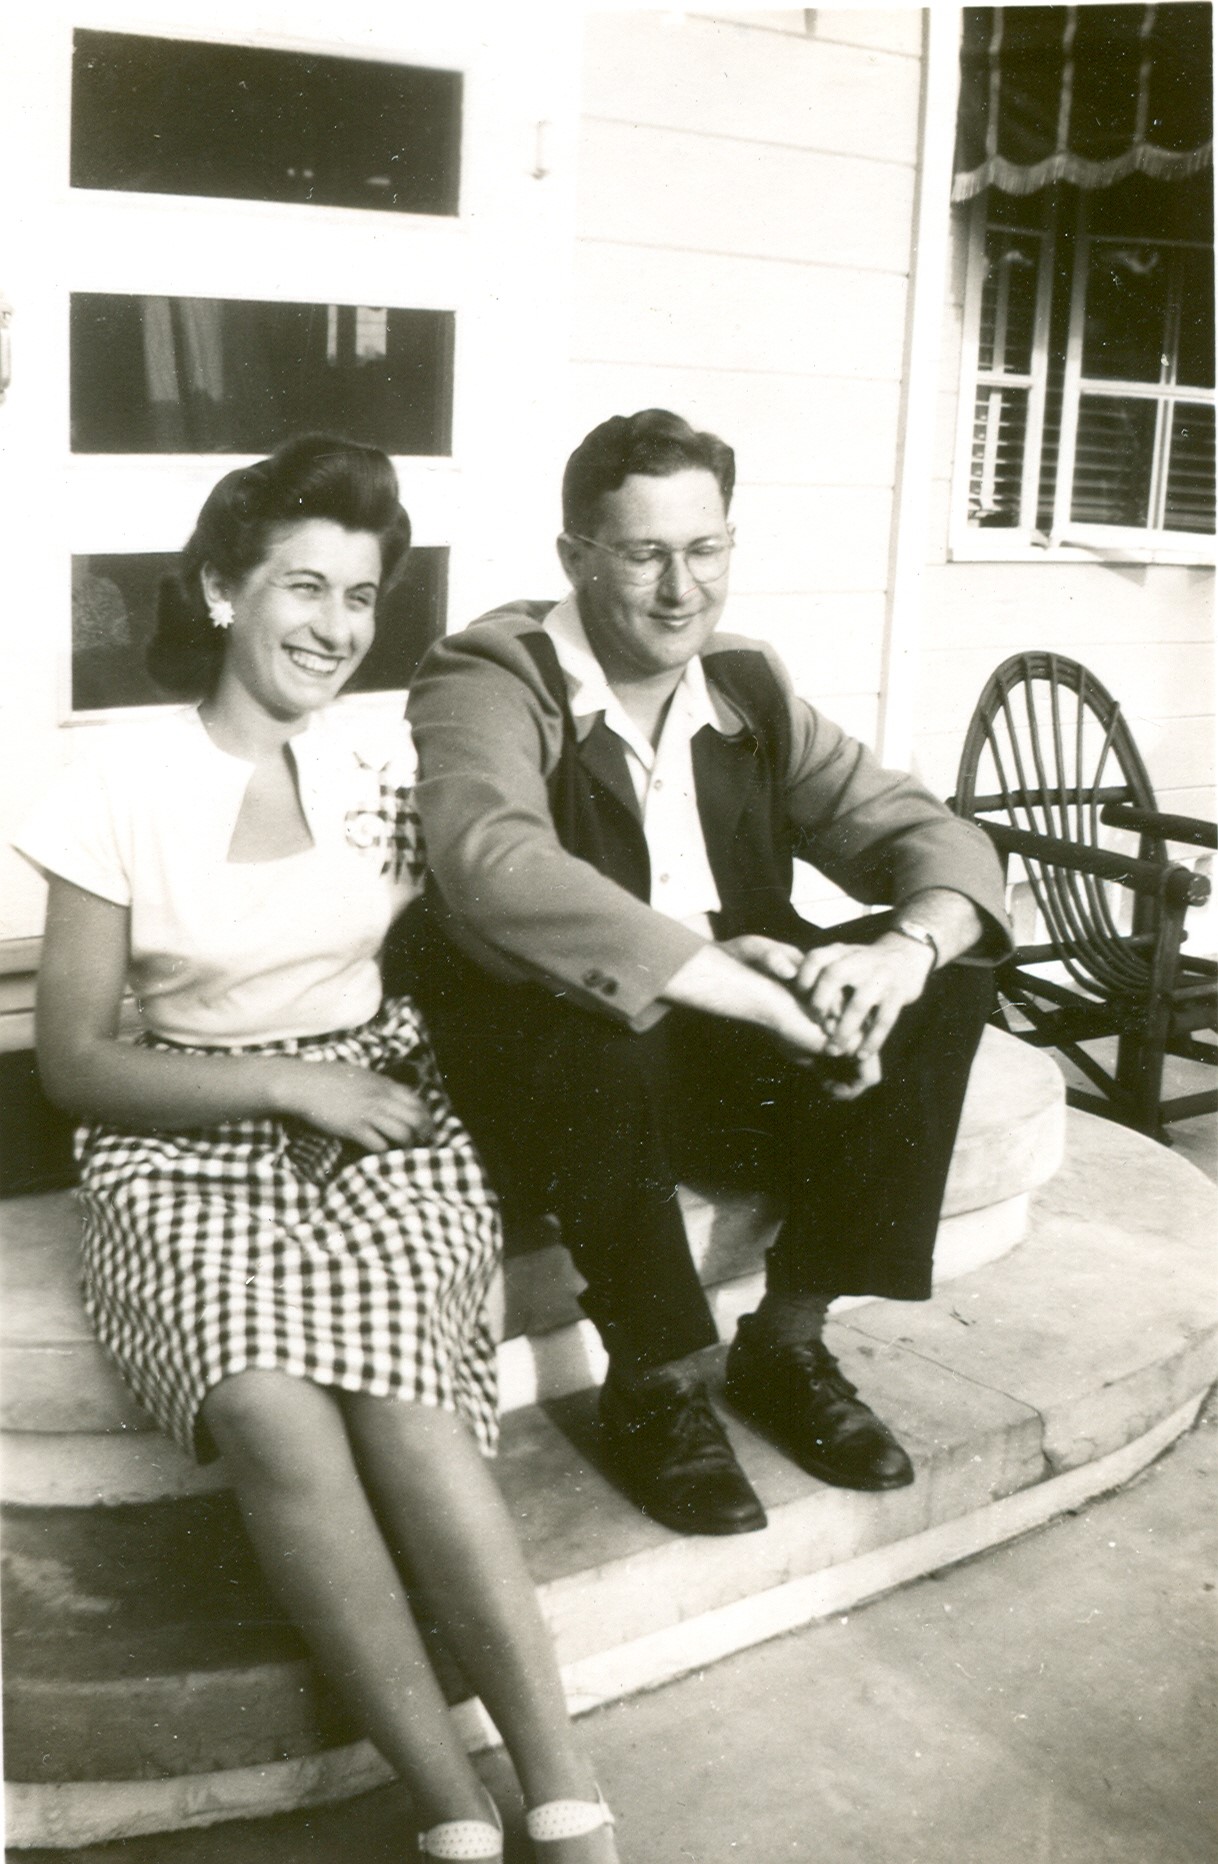 Drs. Robert and Mildred Axelrod